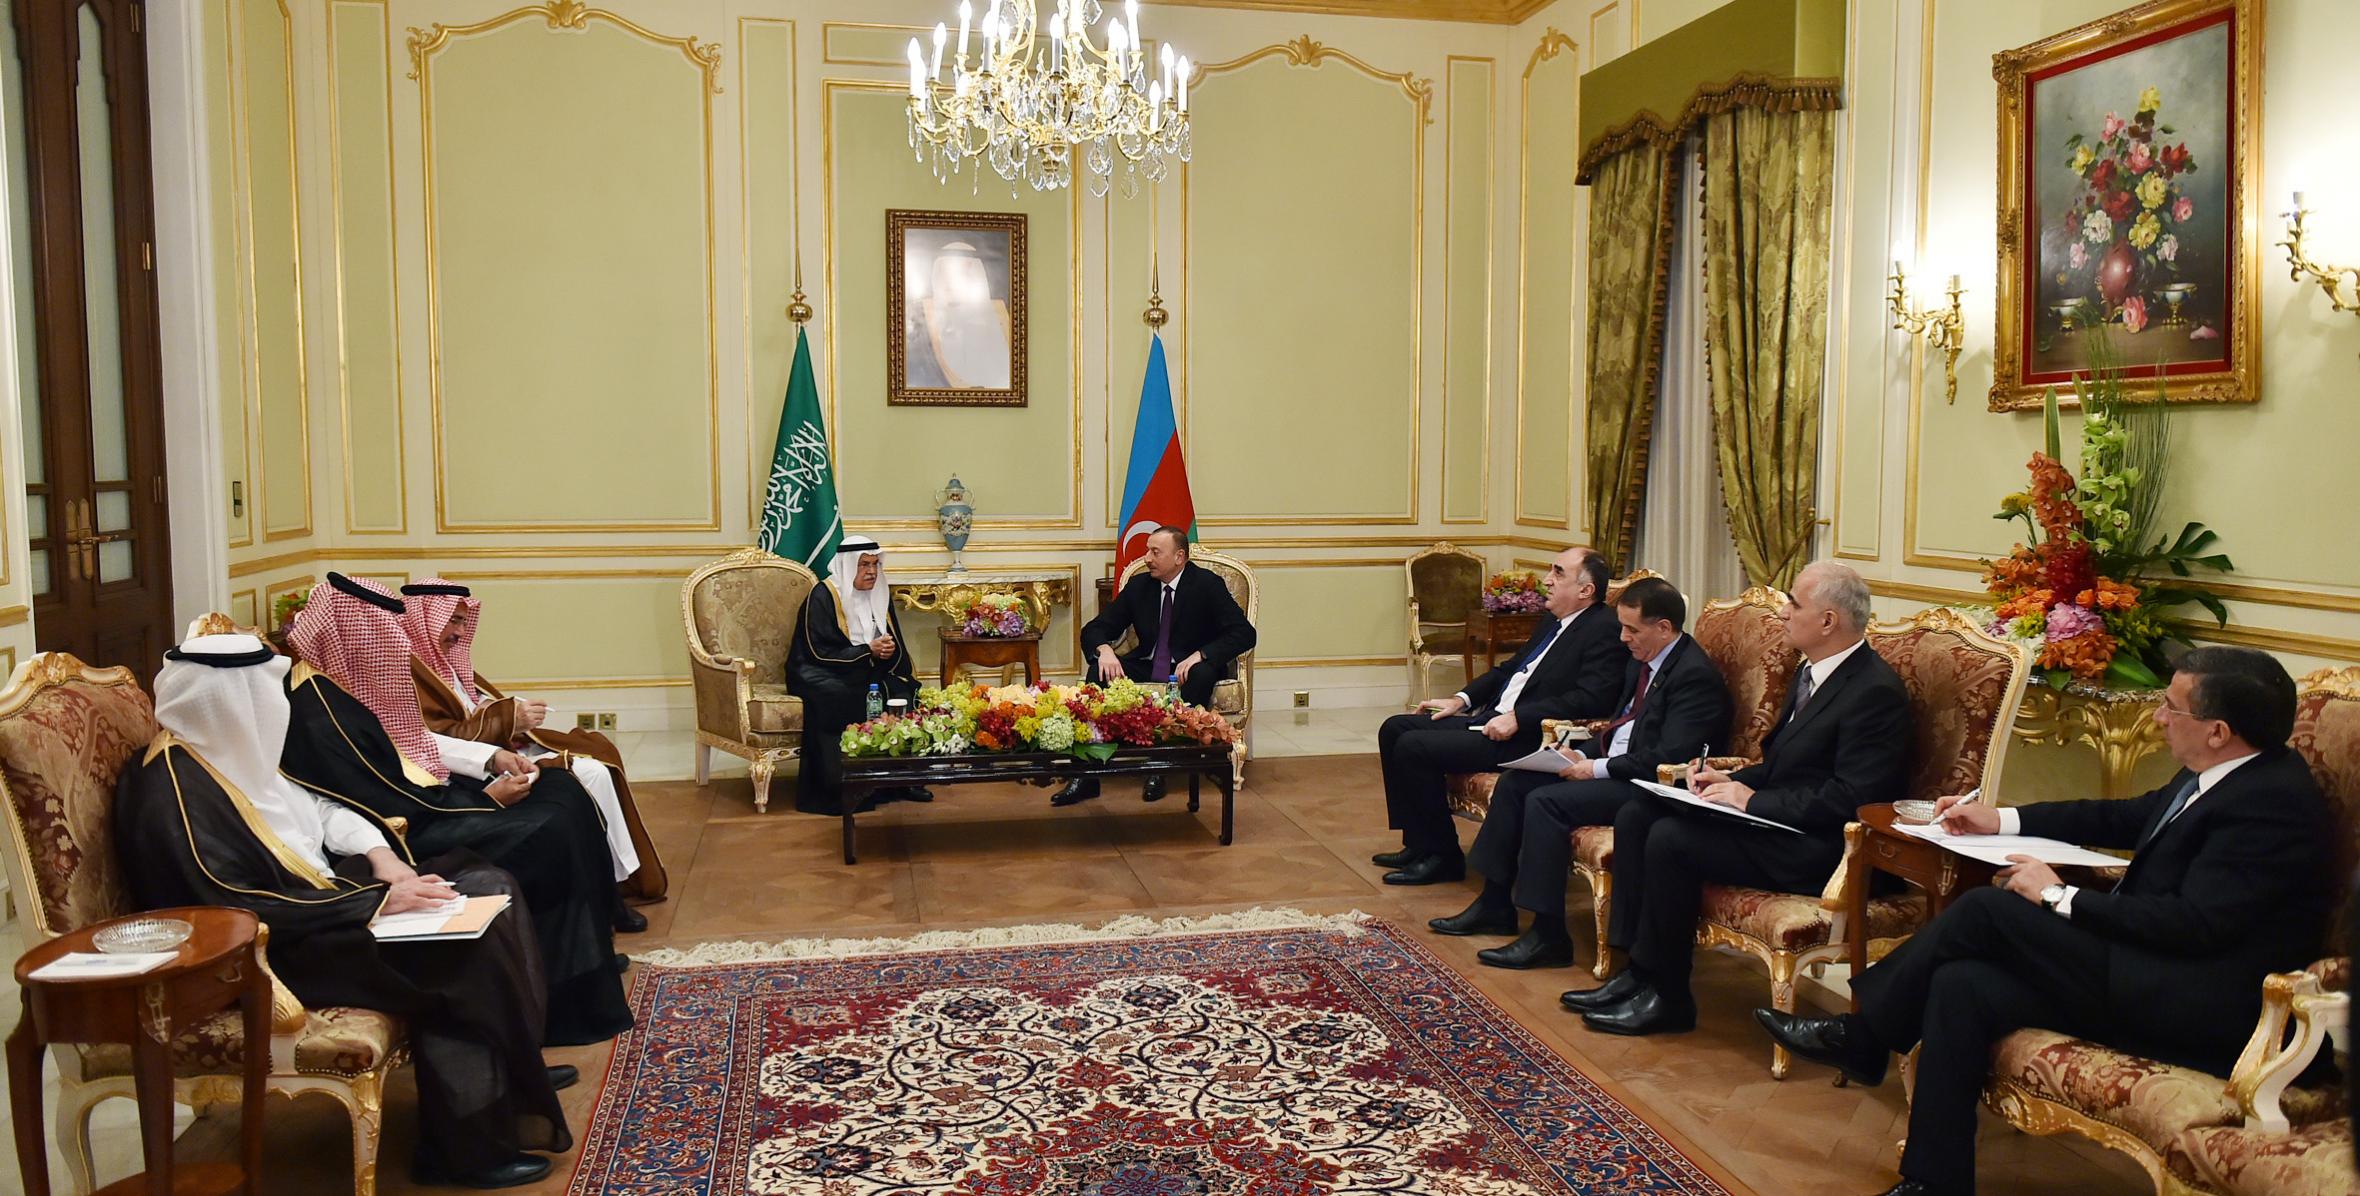 Ilham Aliyev met with the Saudi Arabian Minister of Petroleum and Mineral Resources